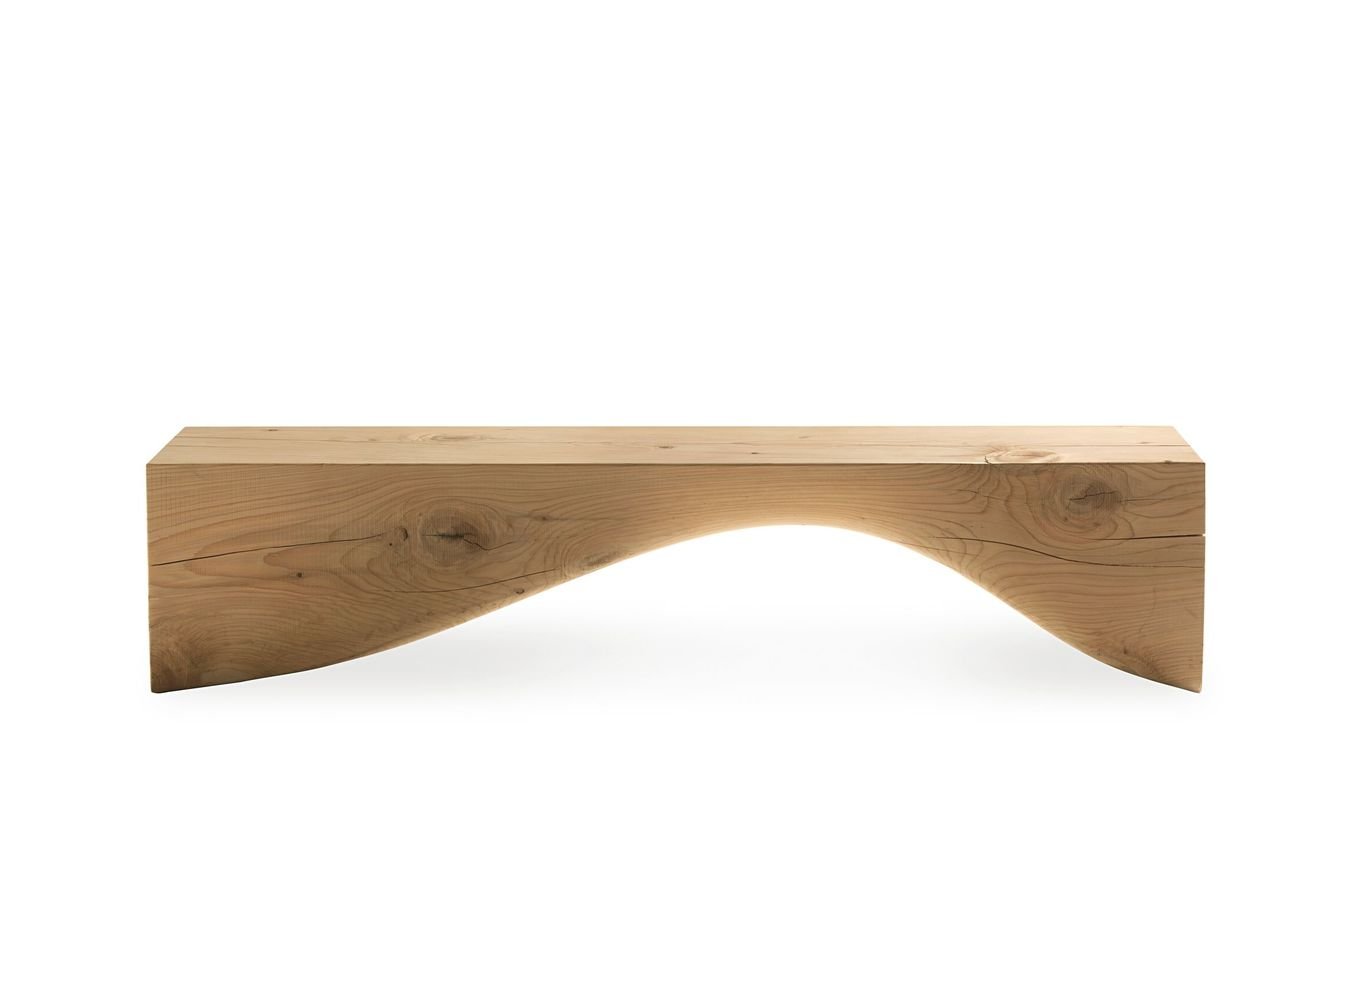 Curve Bench from Riva 1920, designed by Brodie Neill